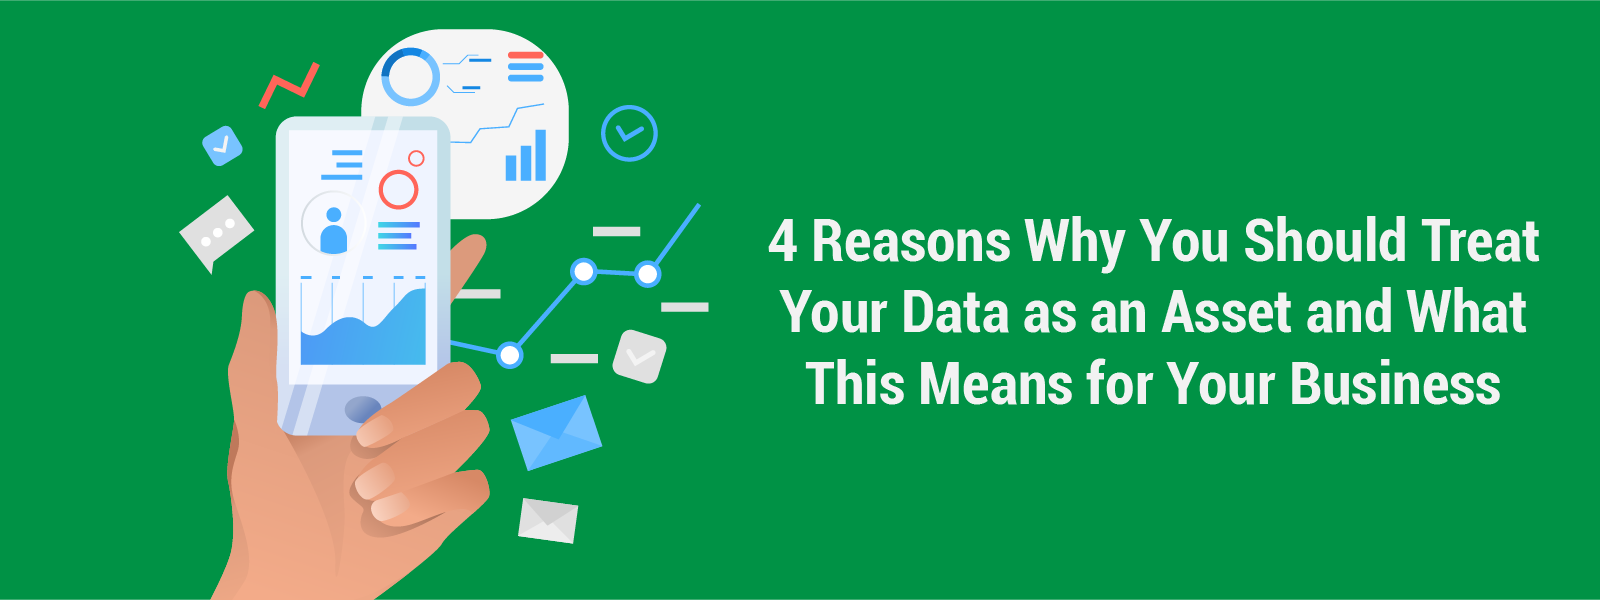 4 Reasons Why You Should Treat Your Data as an Asset and What This Means for Your Business